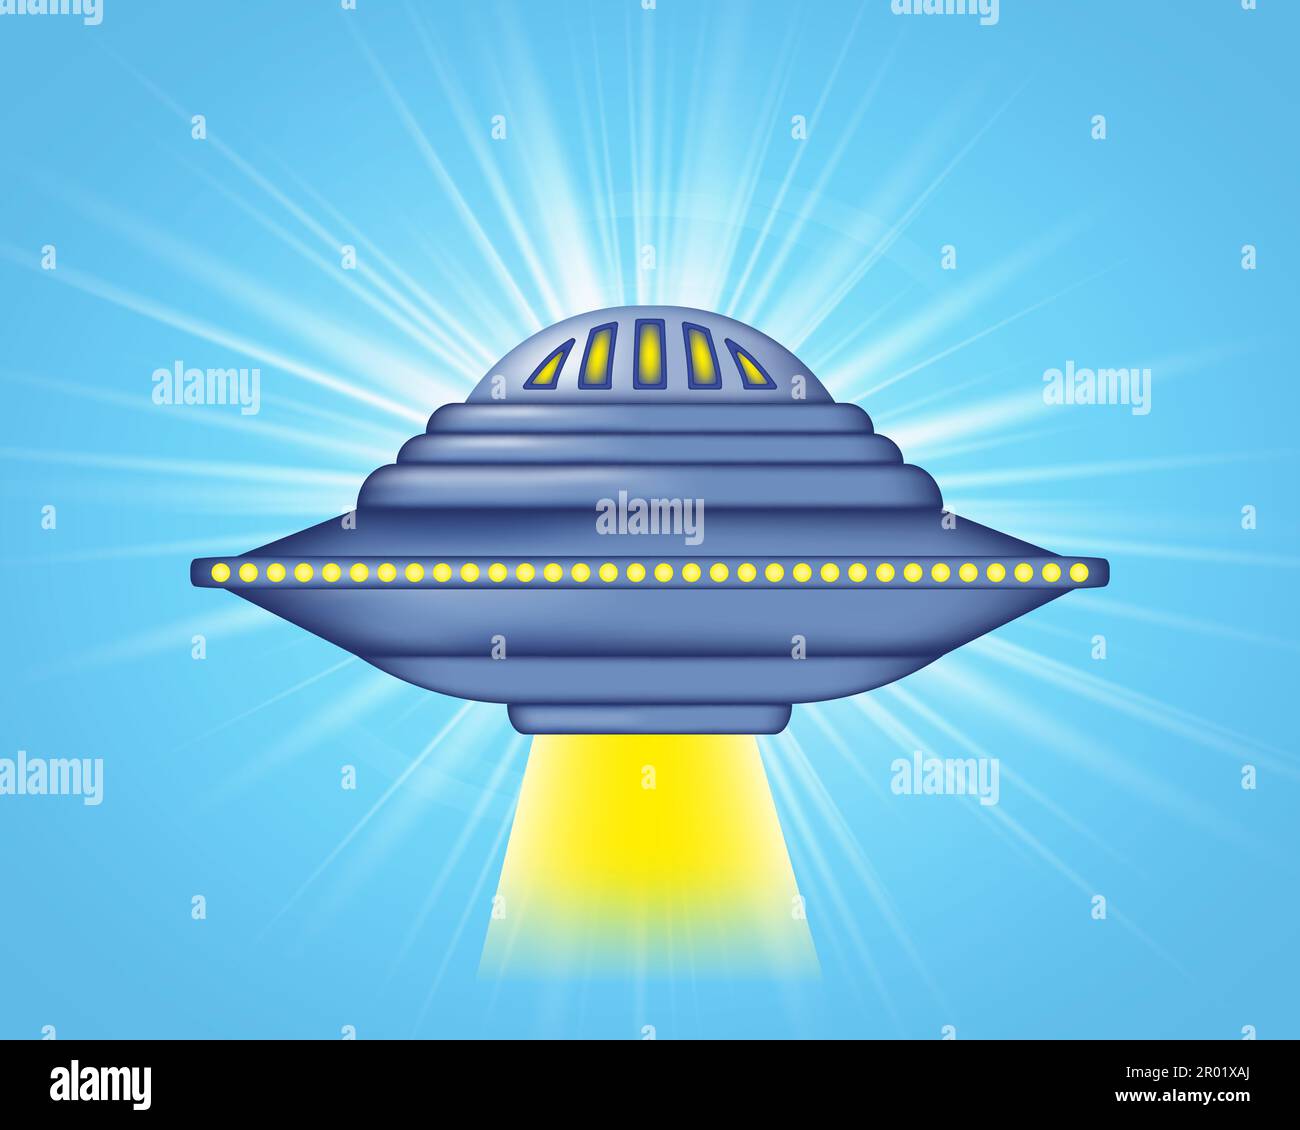 Spaceship alien UFO on a blue background of bright rays of light. Flying saucer with yellow lights in retro style. UFO vintage poster. Vector illustra Stock Vector